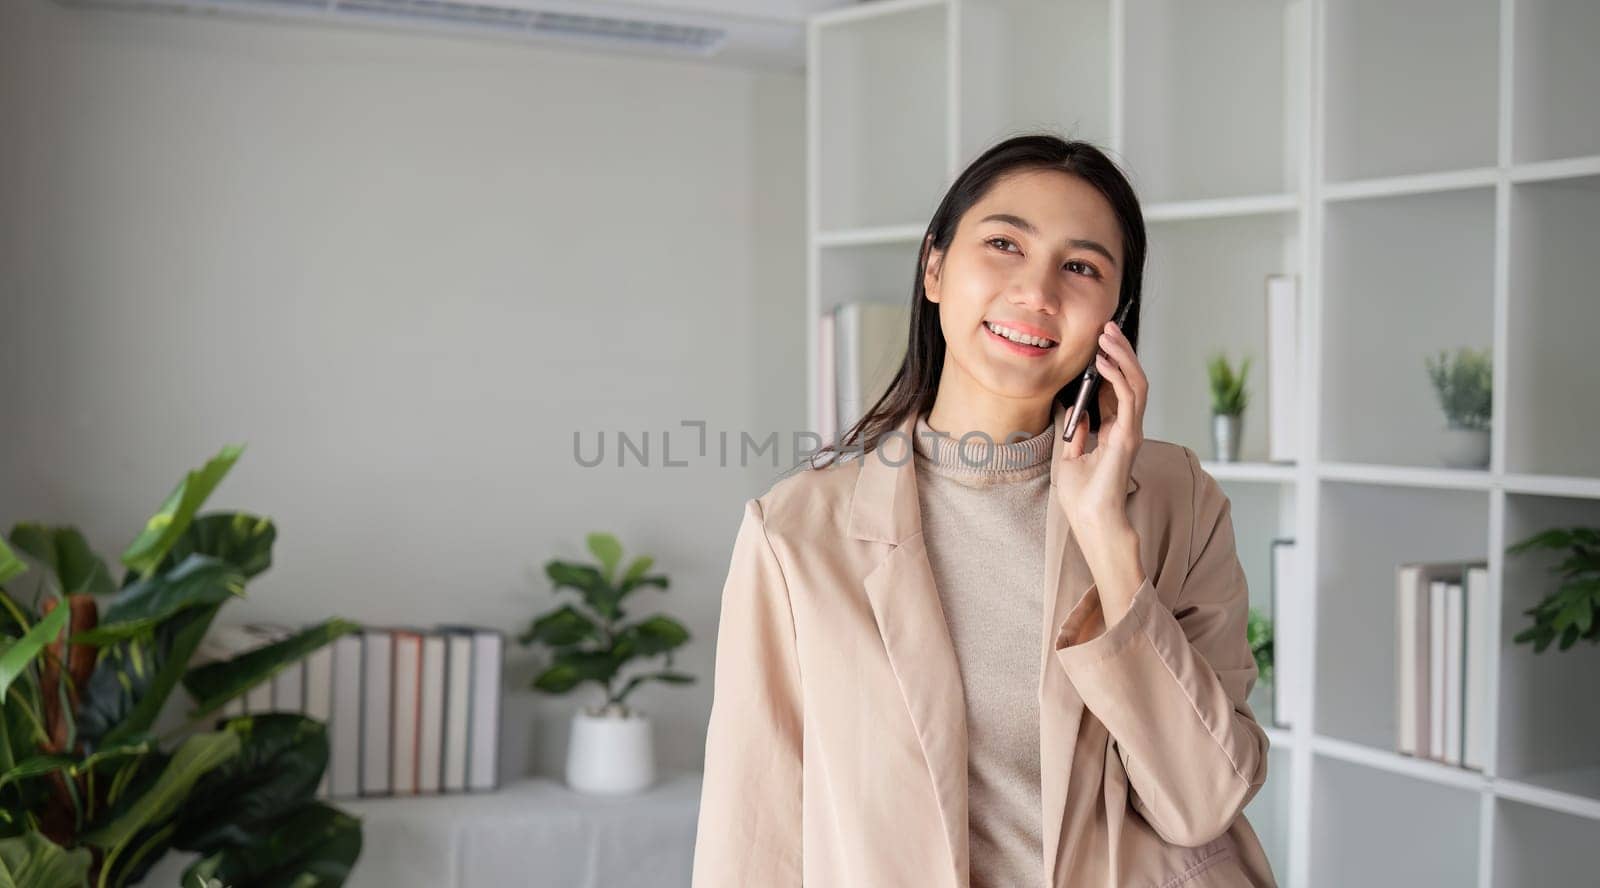 Asian businesswoman talking on the phone in an online business meeting in a modern home office decorated with lush green plants..